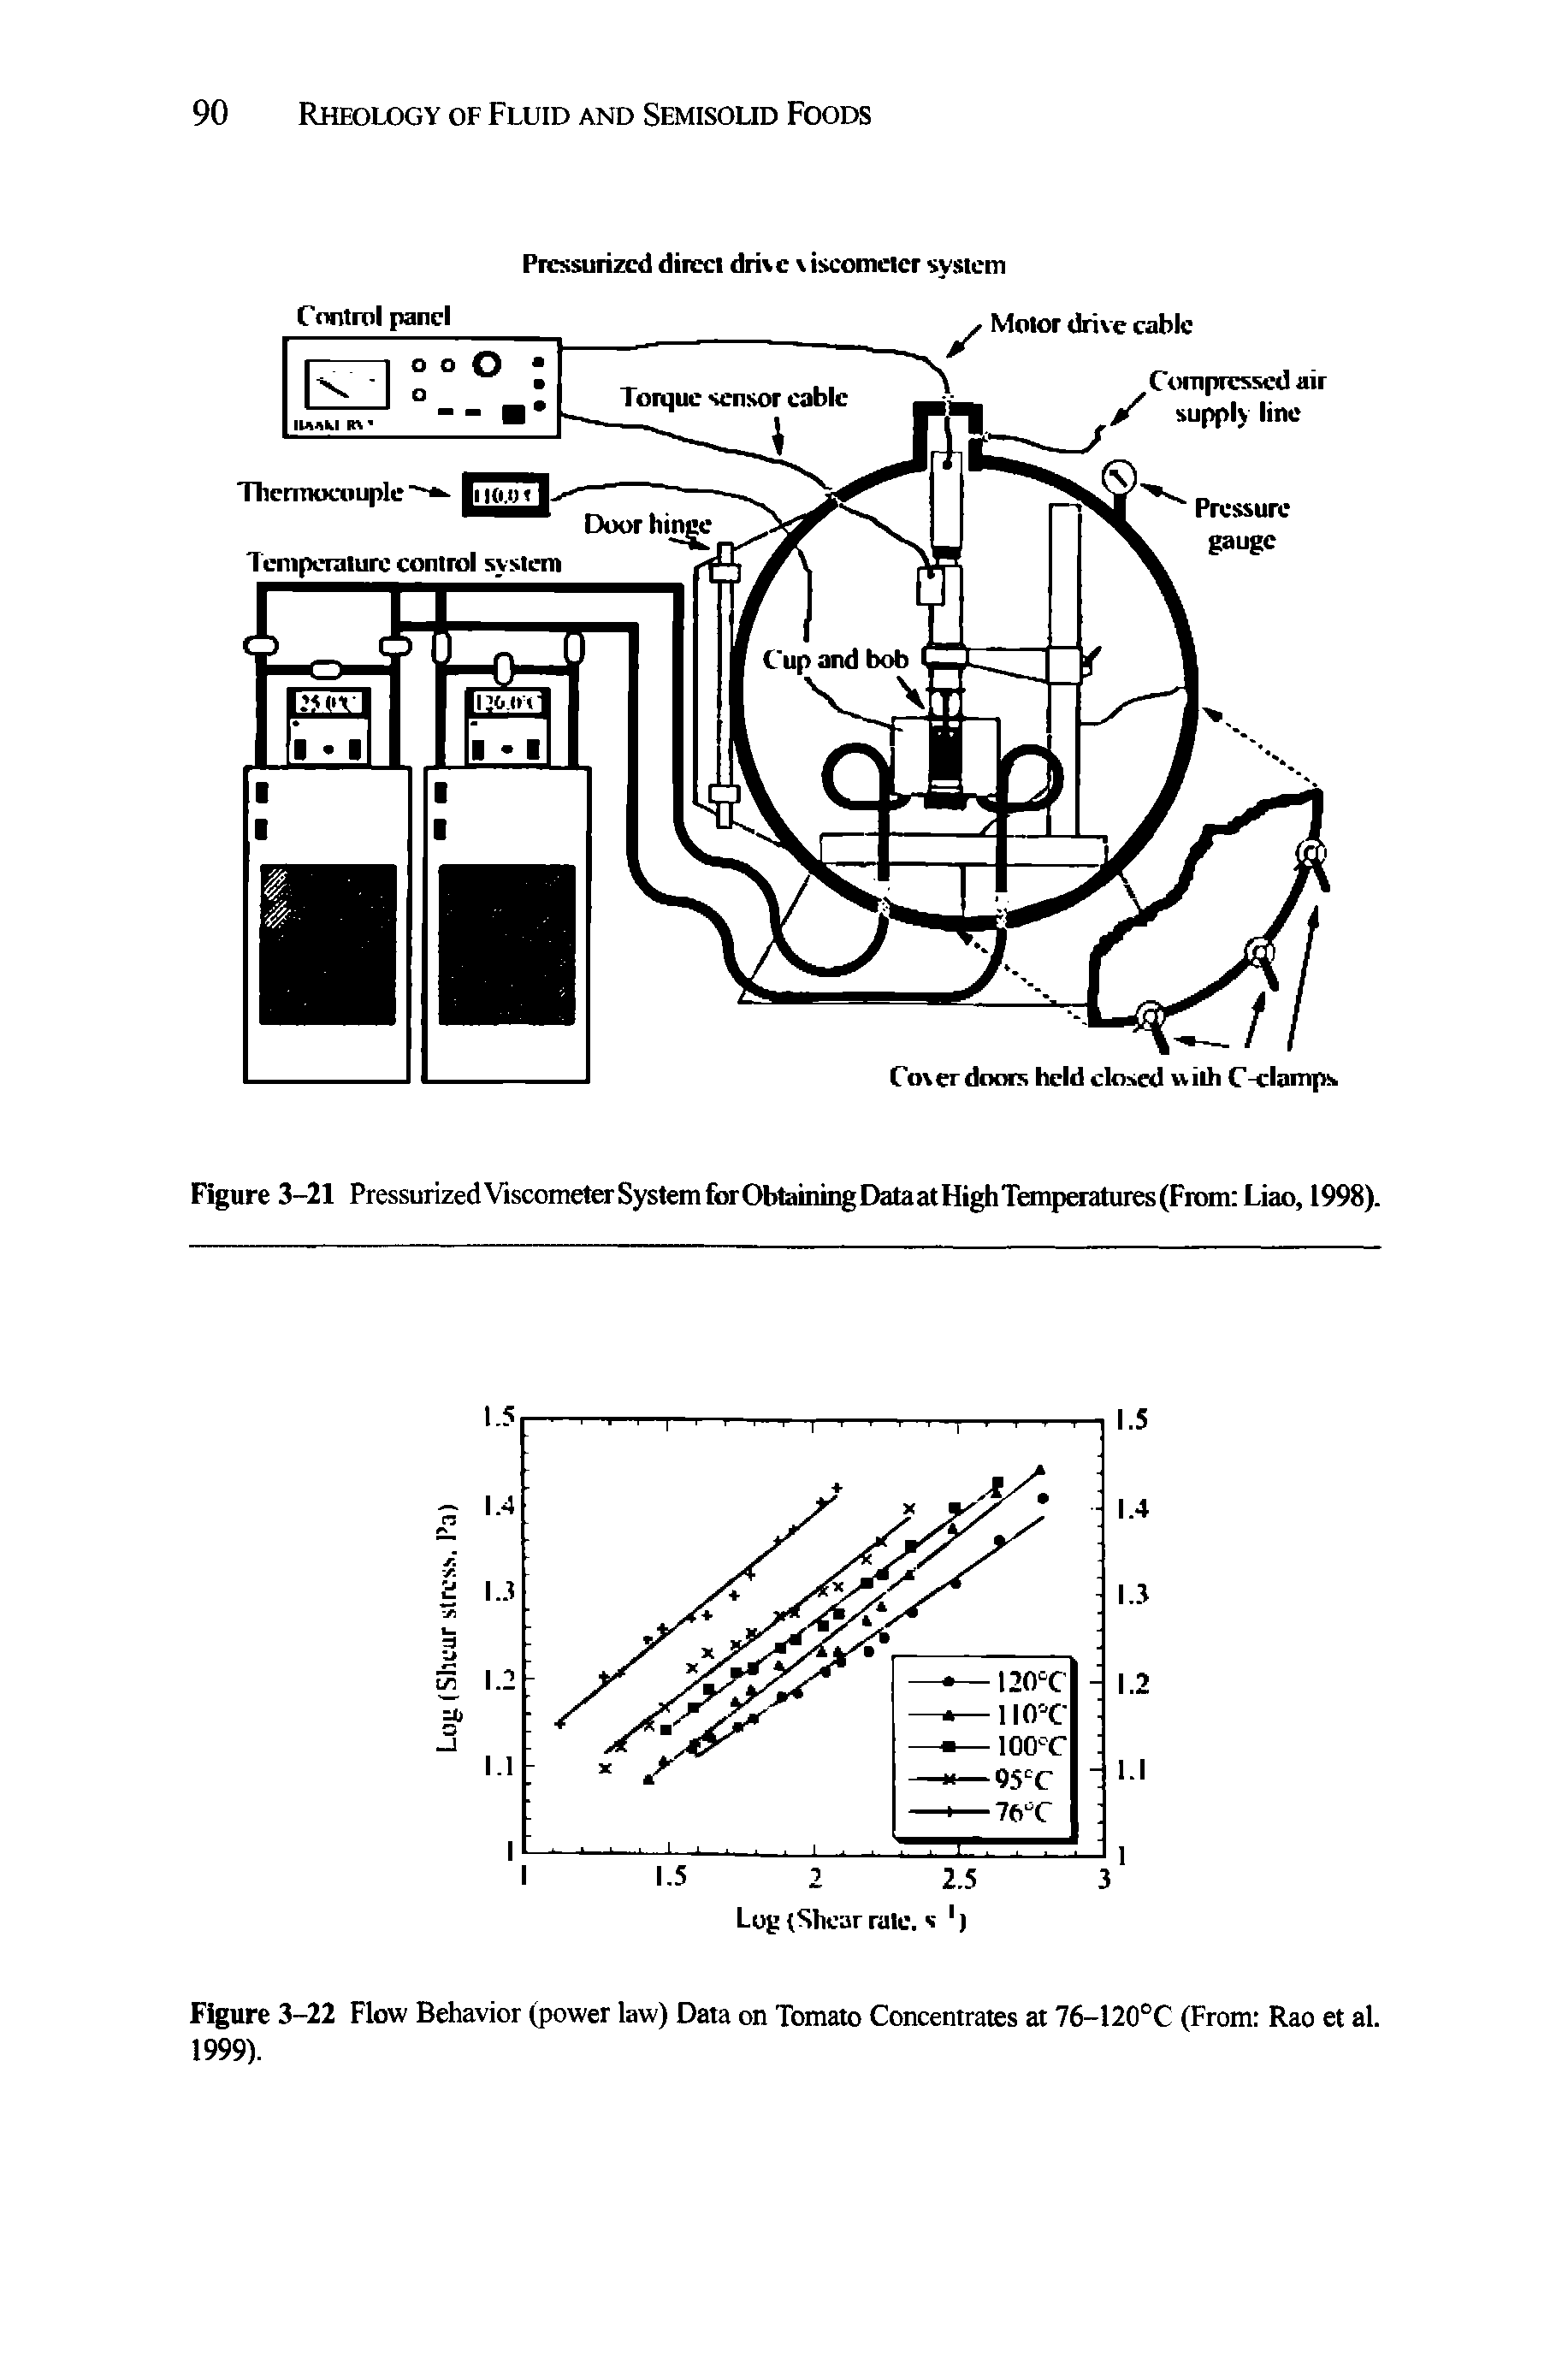 Figure 3-21 Pressurized Viscometer System for Obtaining Data at High Temperatures (From Liao, 1998).